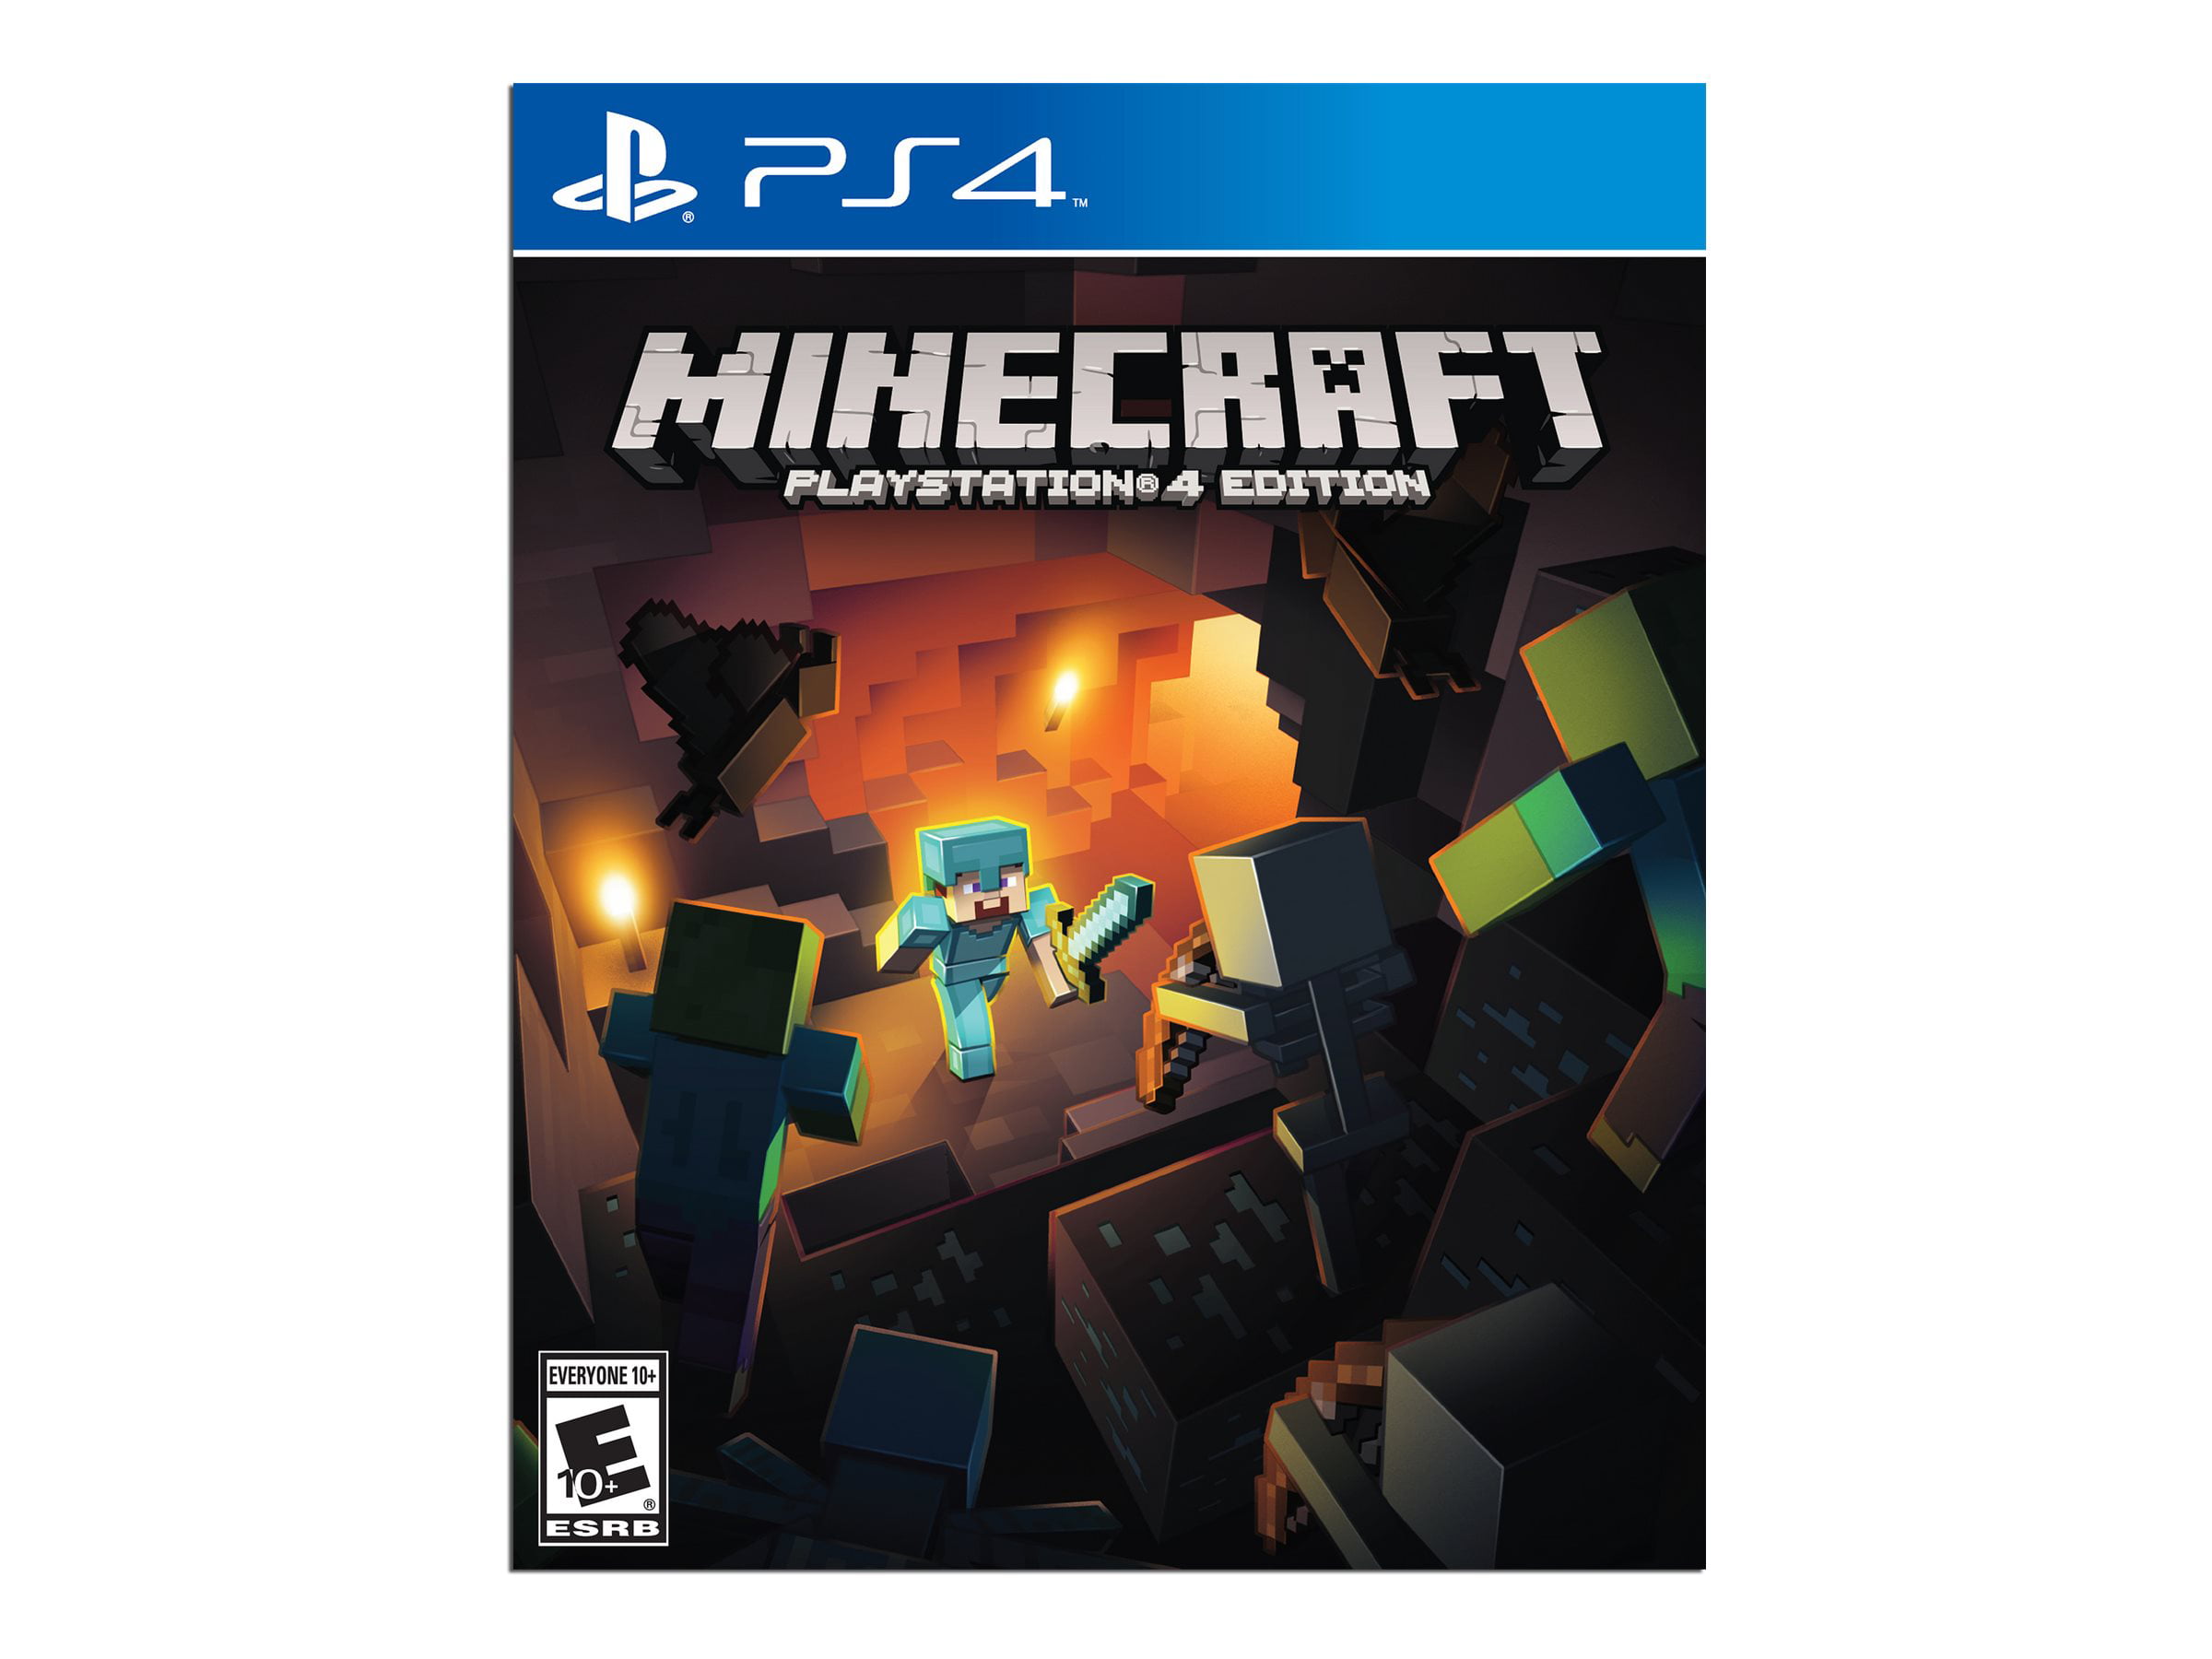 Minecraft PS4 Edition Playstation 4 MINT Condition Fast & UK Stock